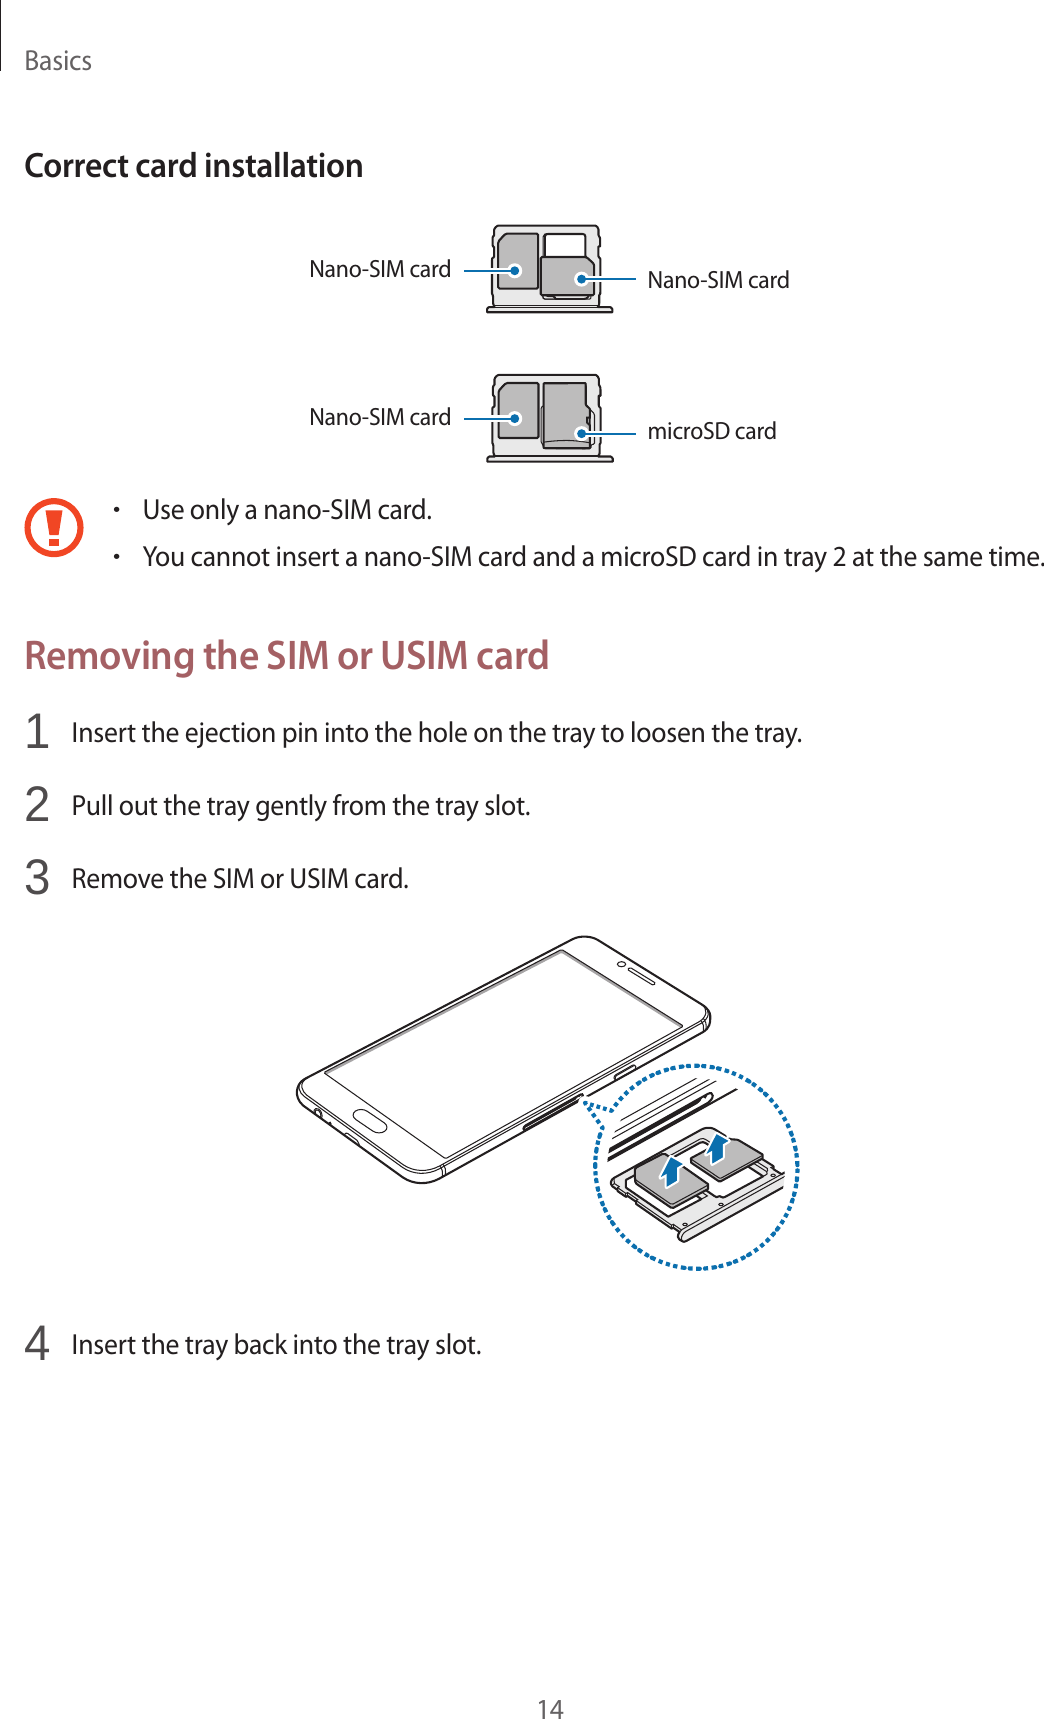 Basics14Correct card installationNano-SIM card Nano-SIM cardNano-SIM cardmicroSD card•Use only a nano-SIM card.•You cannot insert a nano-SIM card and a microSD card in tray 2 at the same time.Removing the SIM or USIM card1  Insert the ejection pin into the hole on the tray to loosen the tray.2  Pull out the tray gently from the tray slot.3  Remove the SIM or USIM card.4  Insert the tray back into the tray slot.